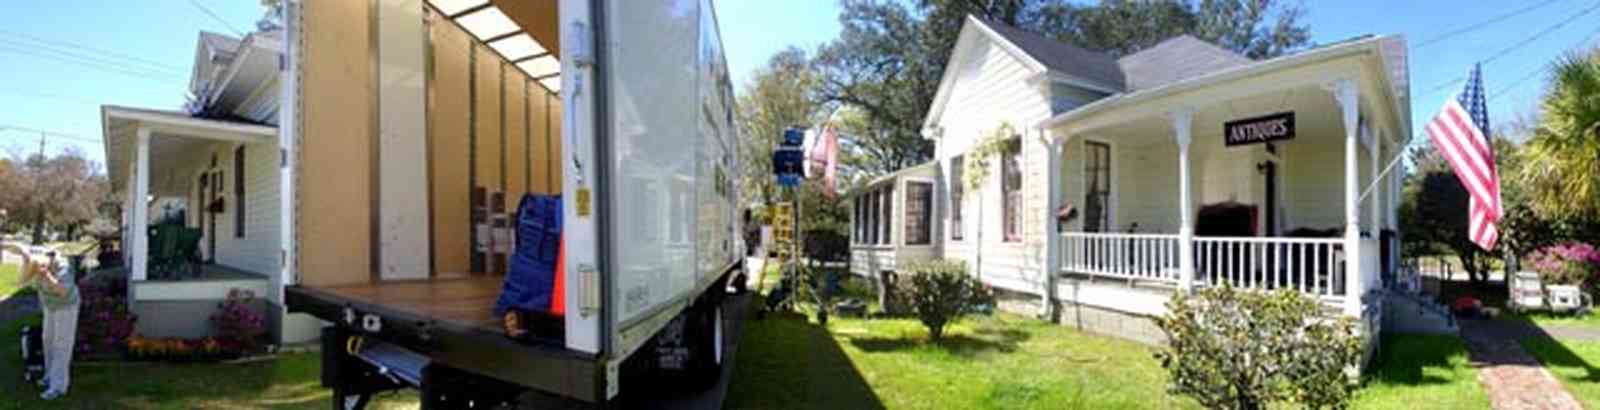 East-Hill:-Jackson-Hill-Antiques_tmaat10.jpg:  antique shop, moving truck, commercial, 